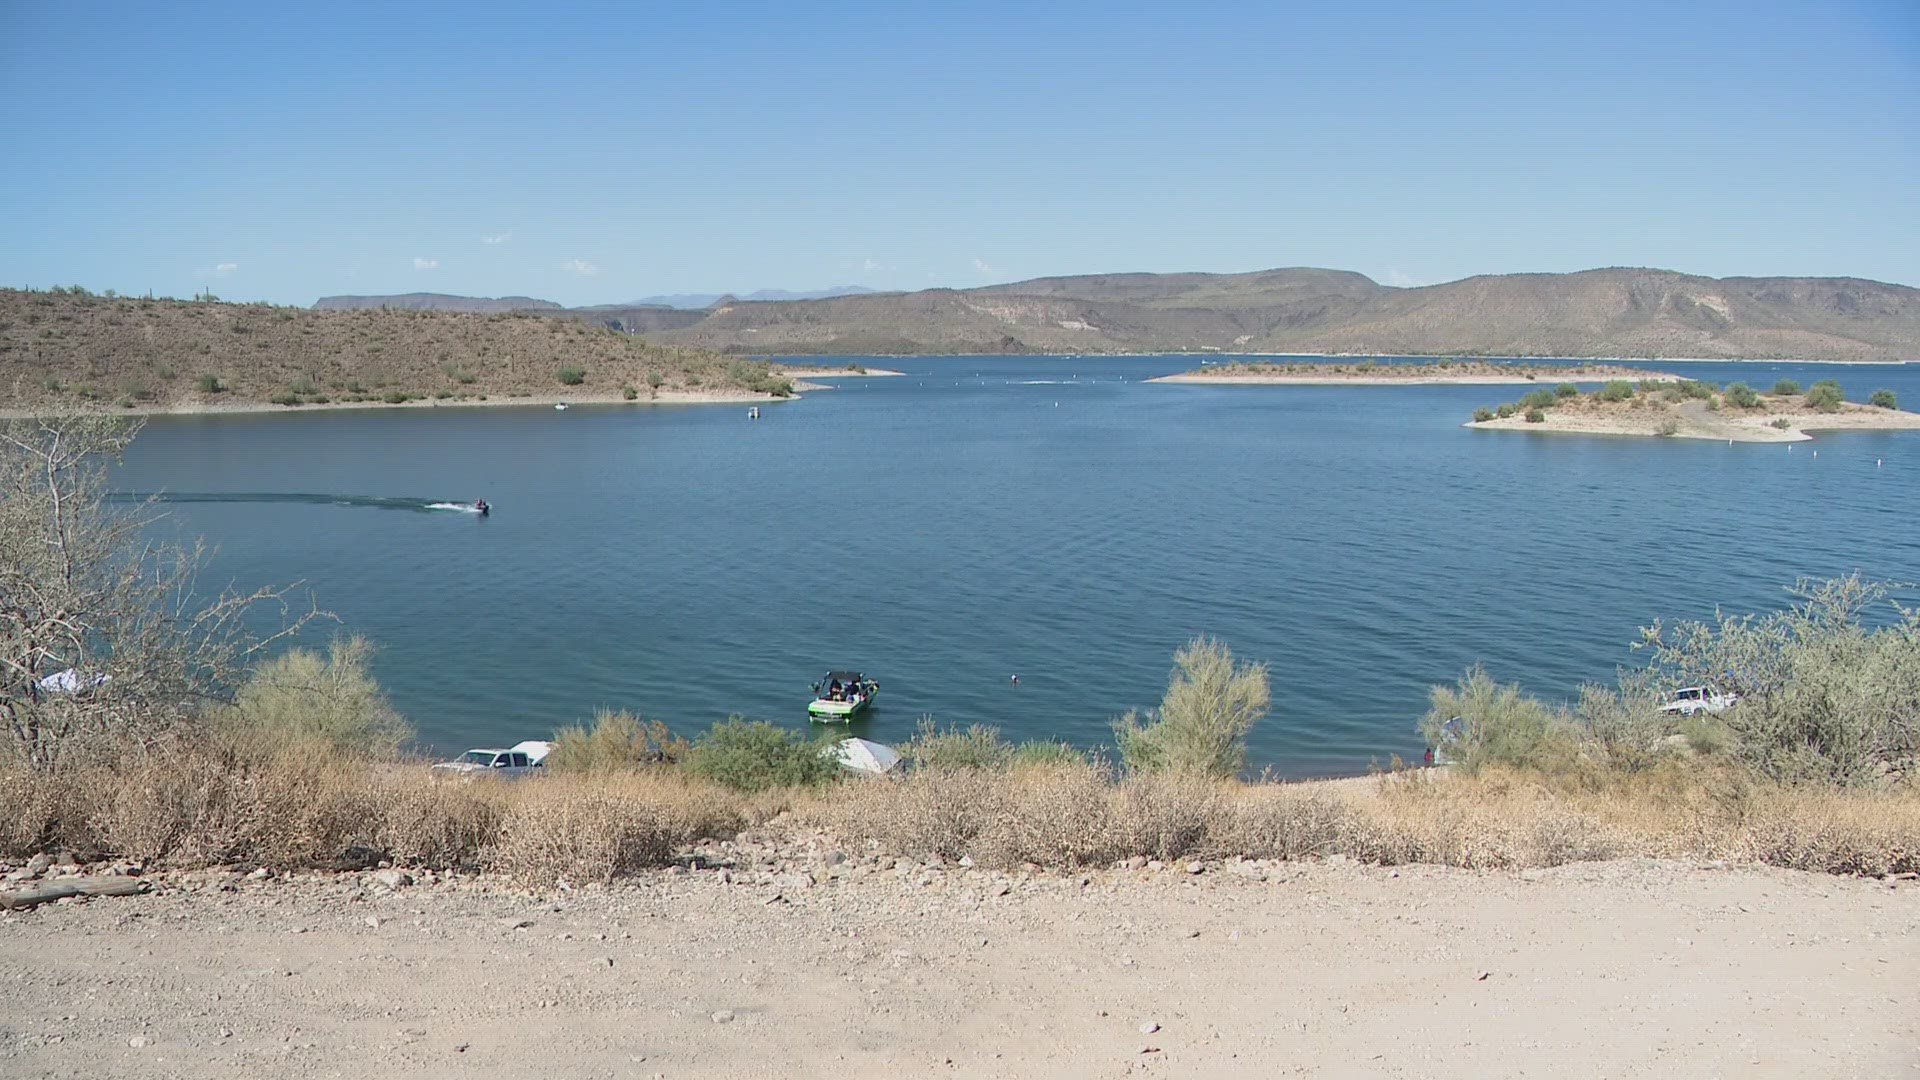 The sheriff's office said the man and his 5-year-old cousin both had to be pulled from the water Sunday afternoon. The child has been released from the hospital.